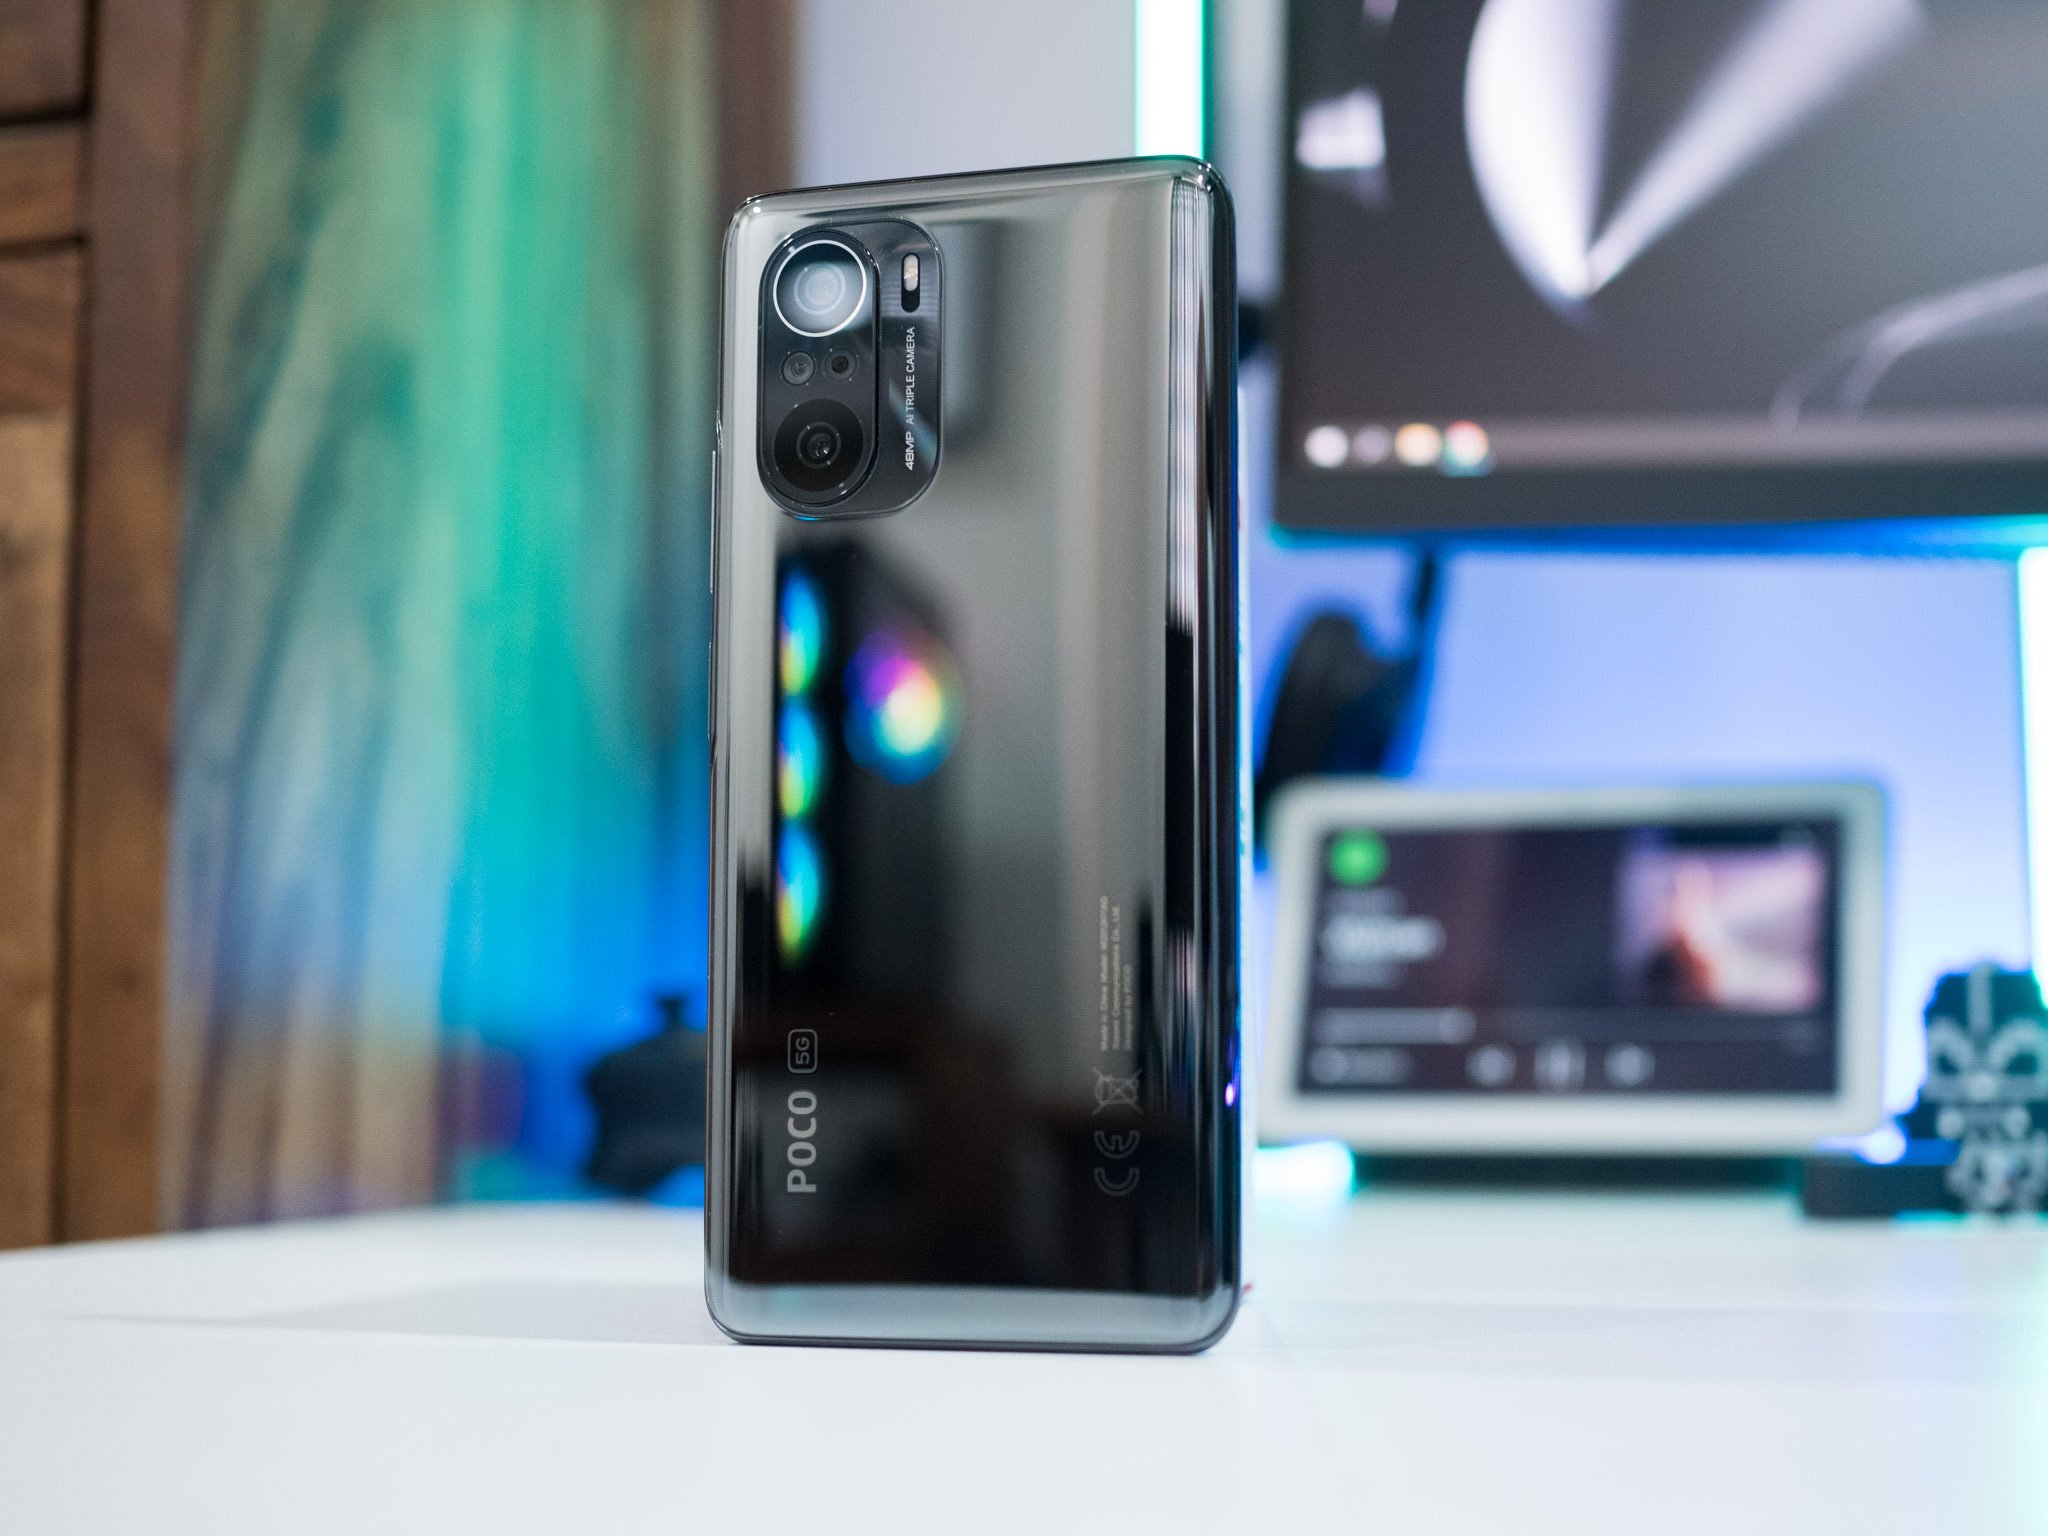 POCO X3 Pro review: bringing great value to the mid-range market